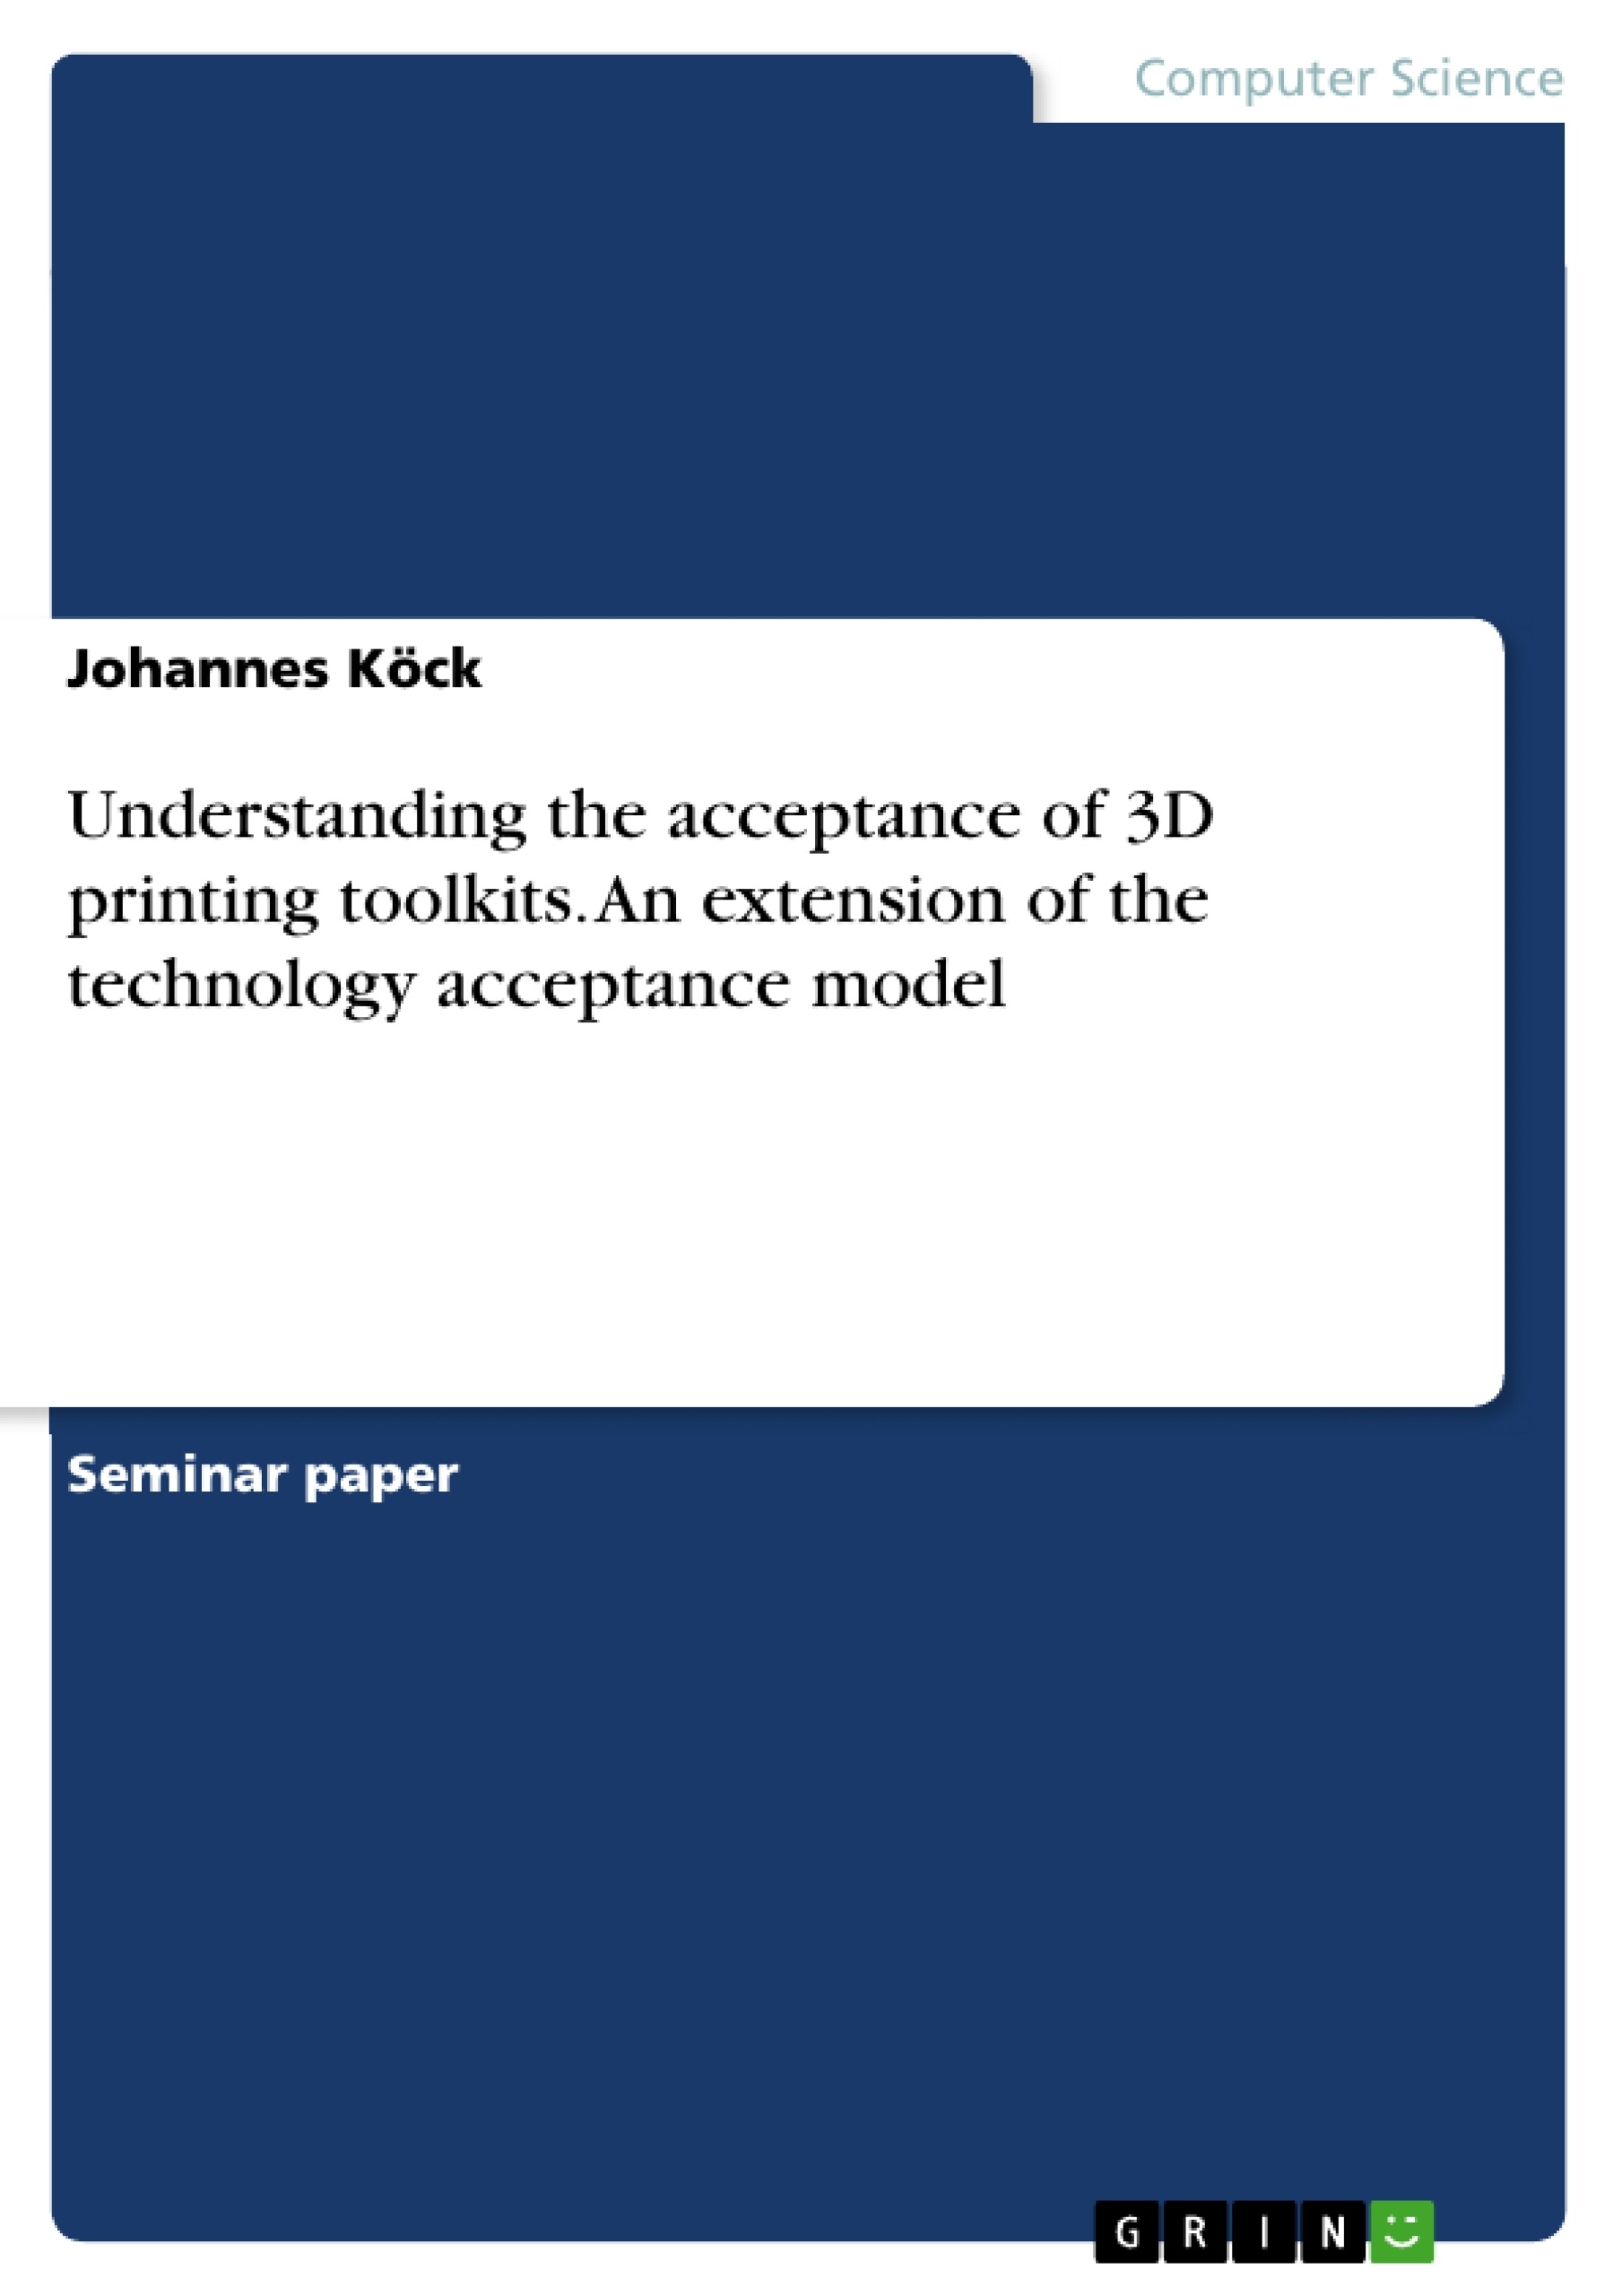 Title: Understanding the acceptance of 3D printing toolkits. An extension of the technology acceptance model